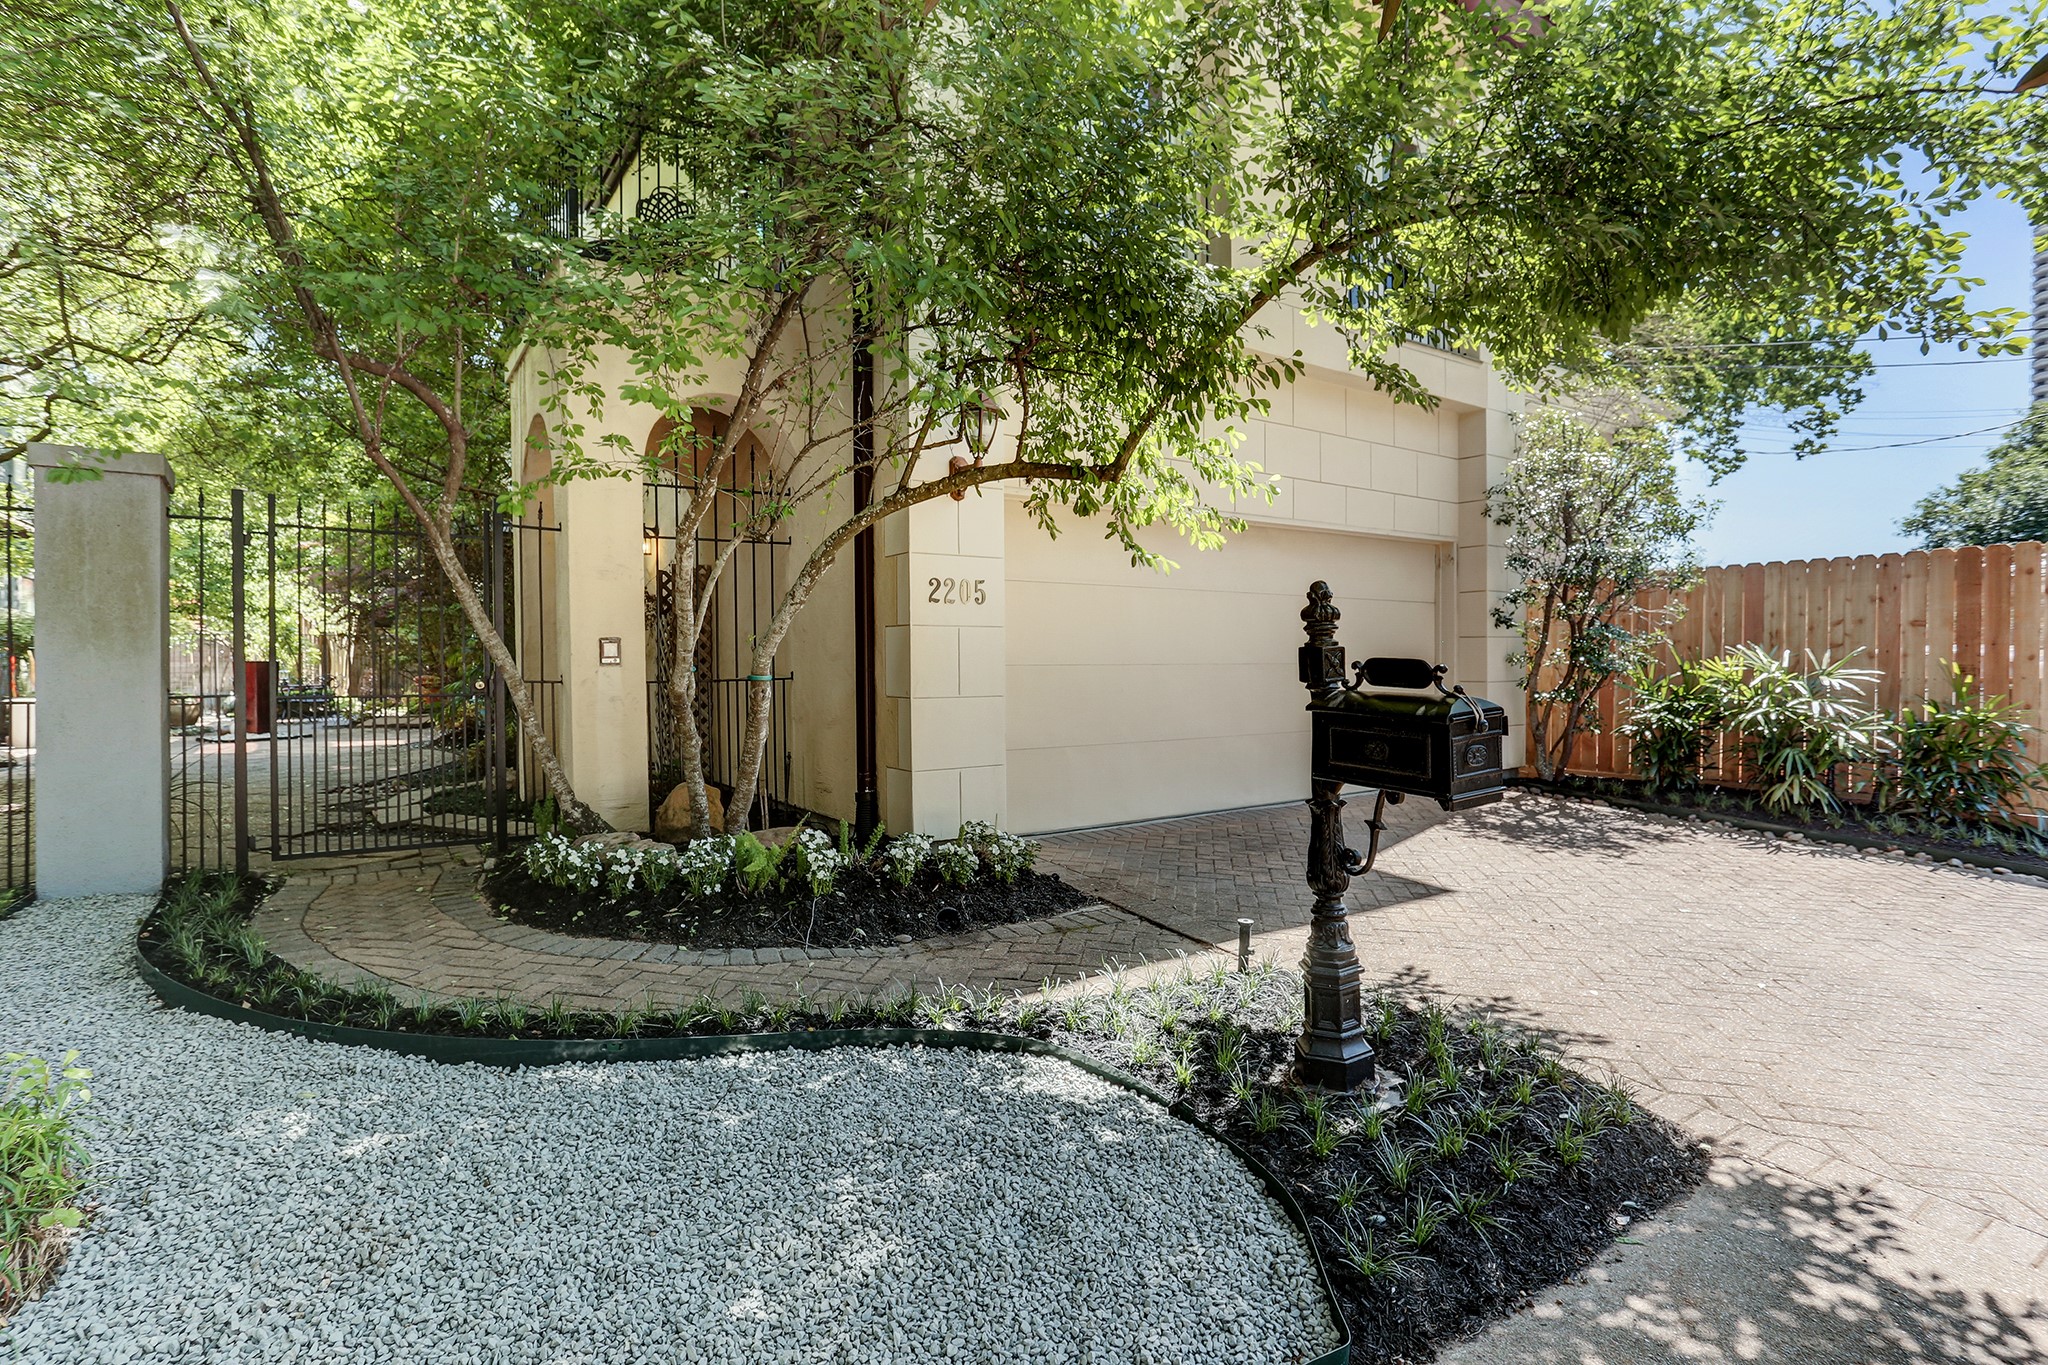 Wonderful home tucked away on quite street in the River Oaks area.